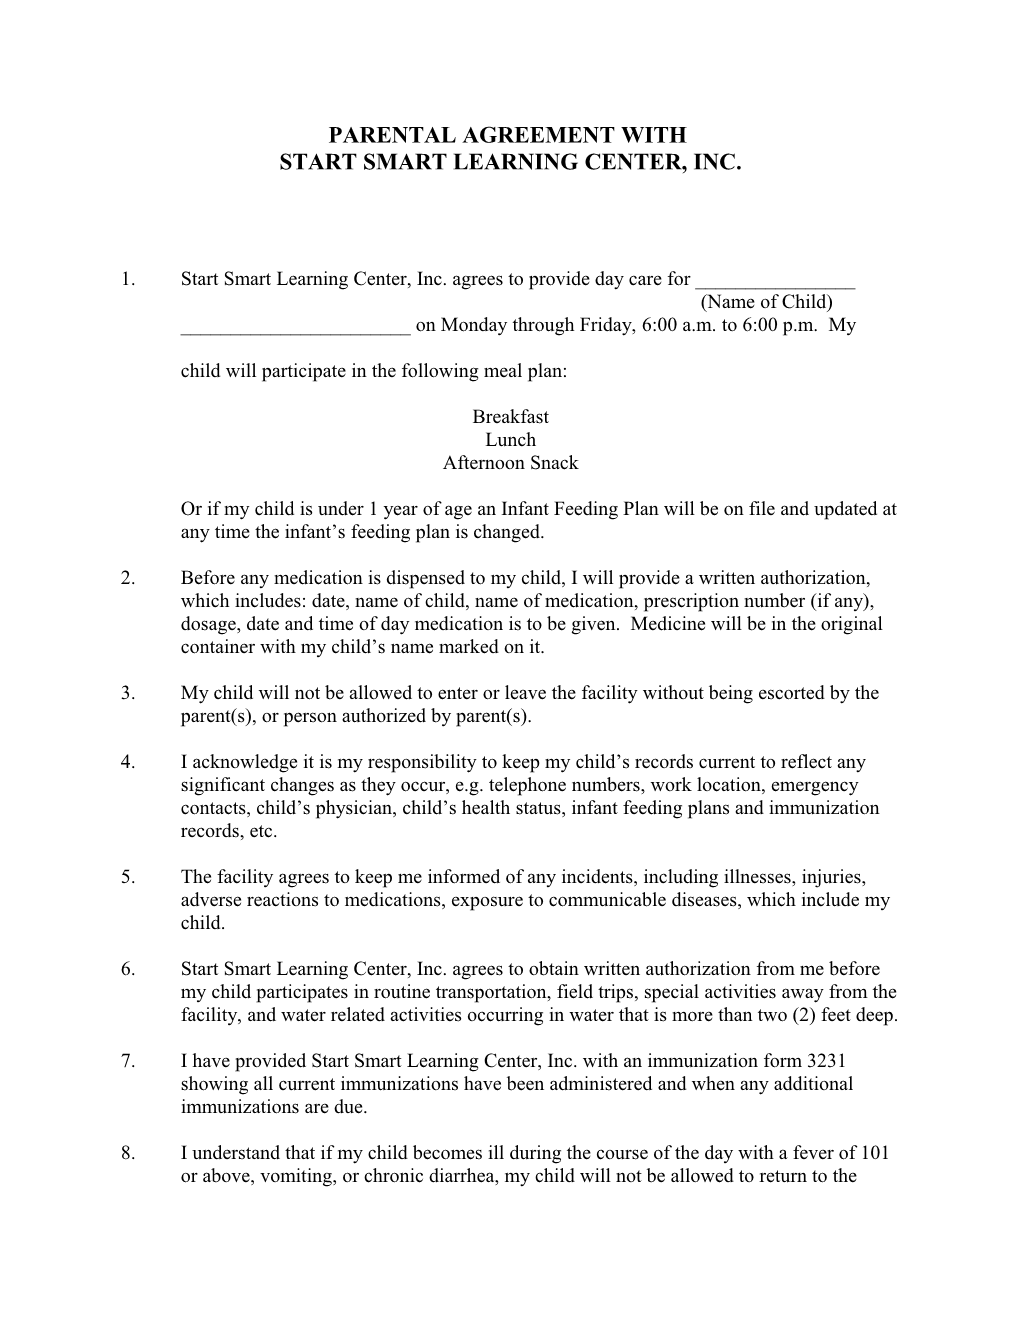 Parental Agreement with Child Care Facility